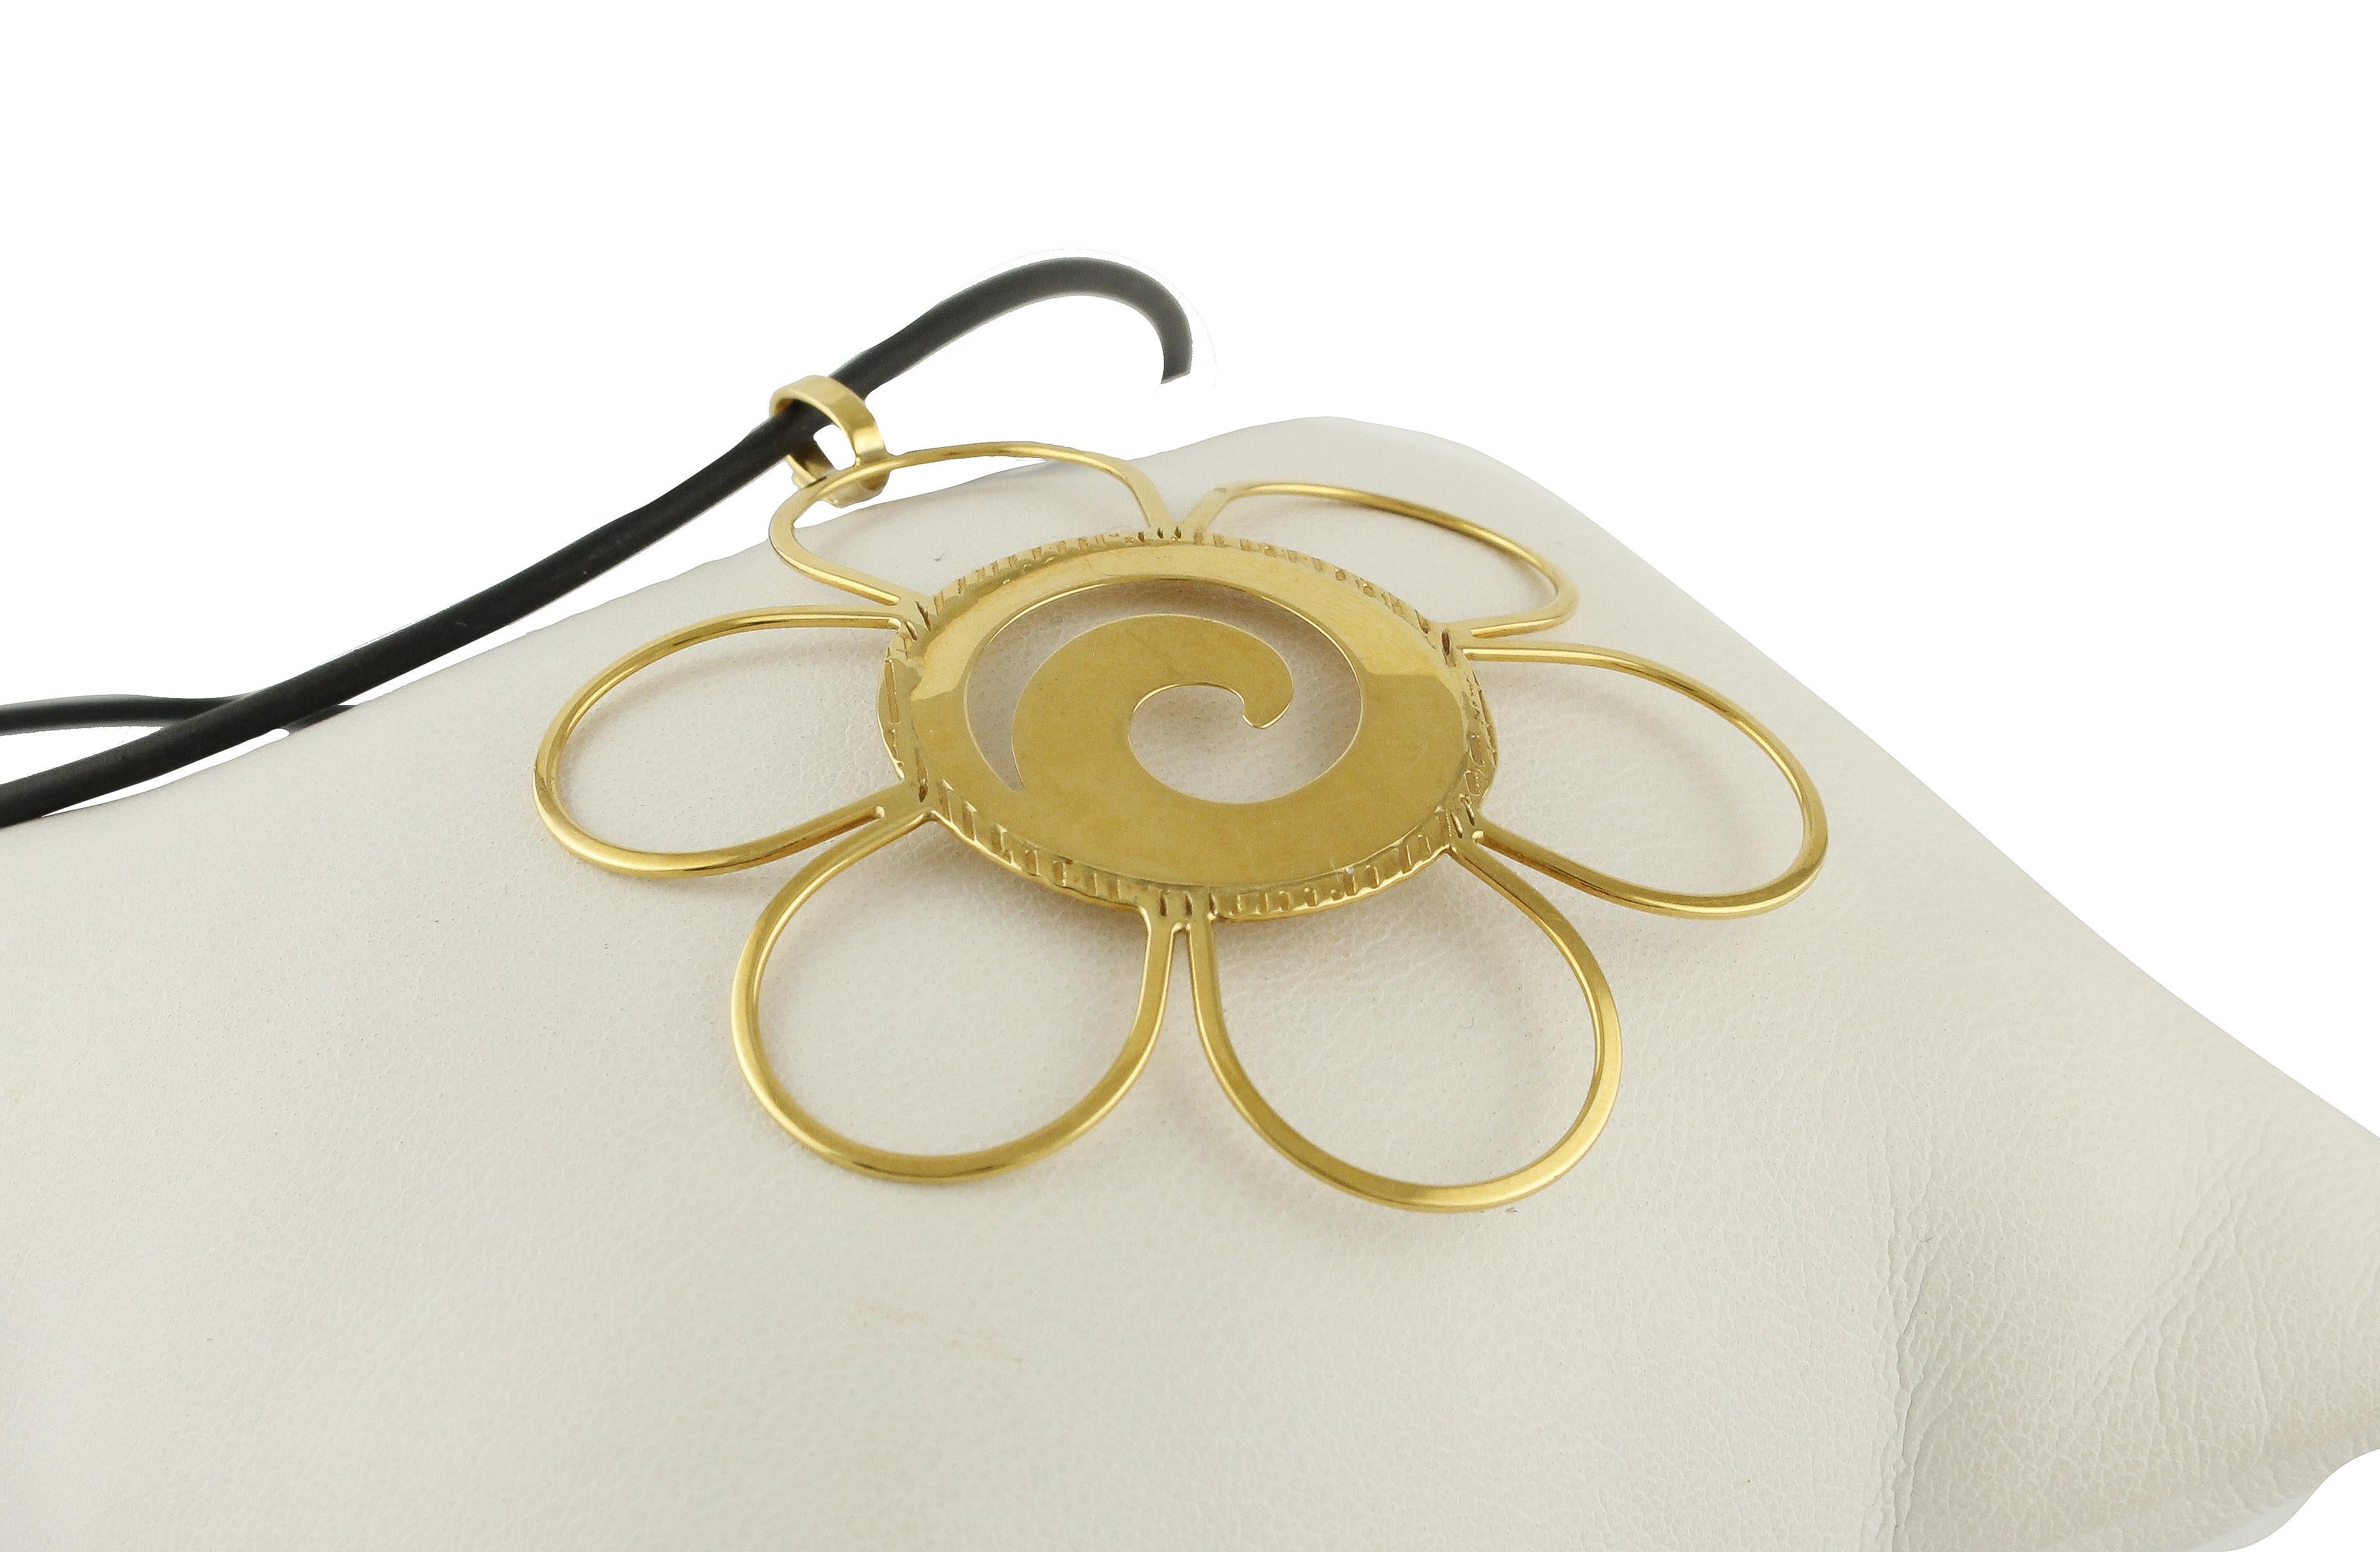 SHIPPING POLICY:
No additional costs will be added to this order.
Shipping costs will be totally covered by the seller (customs duties included).

Fabulous  Flower Pendant Necklace in 18k Yellow Gold 
Total Weight 6.00 g
R.F + aroa
Dimentions 6.4 cm